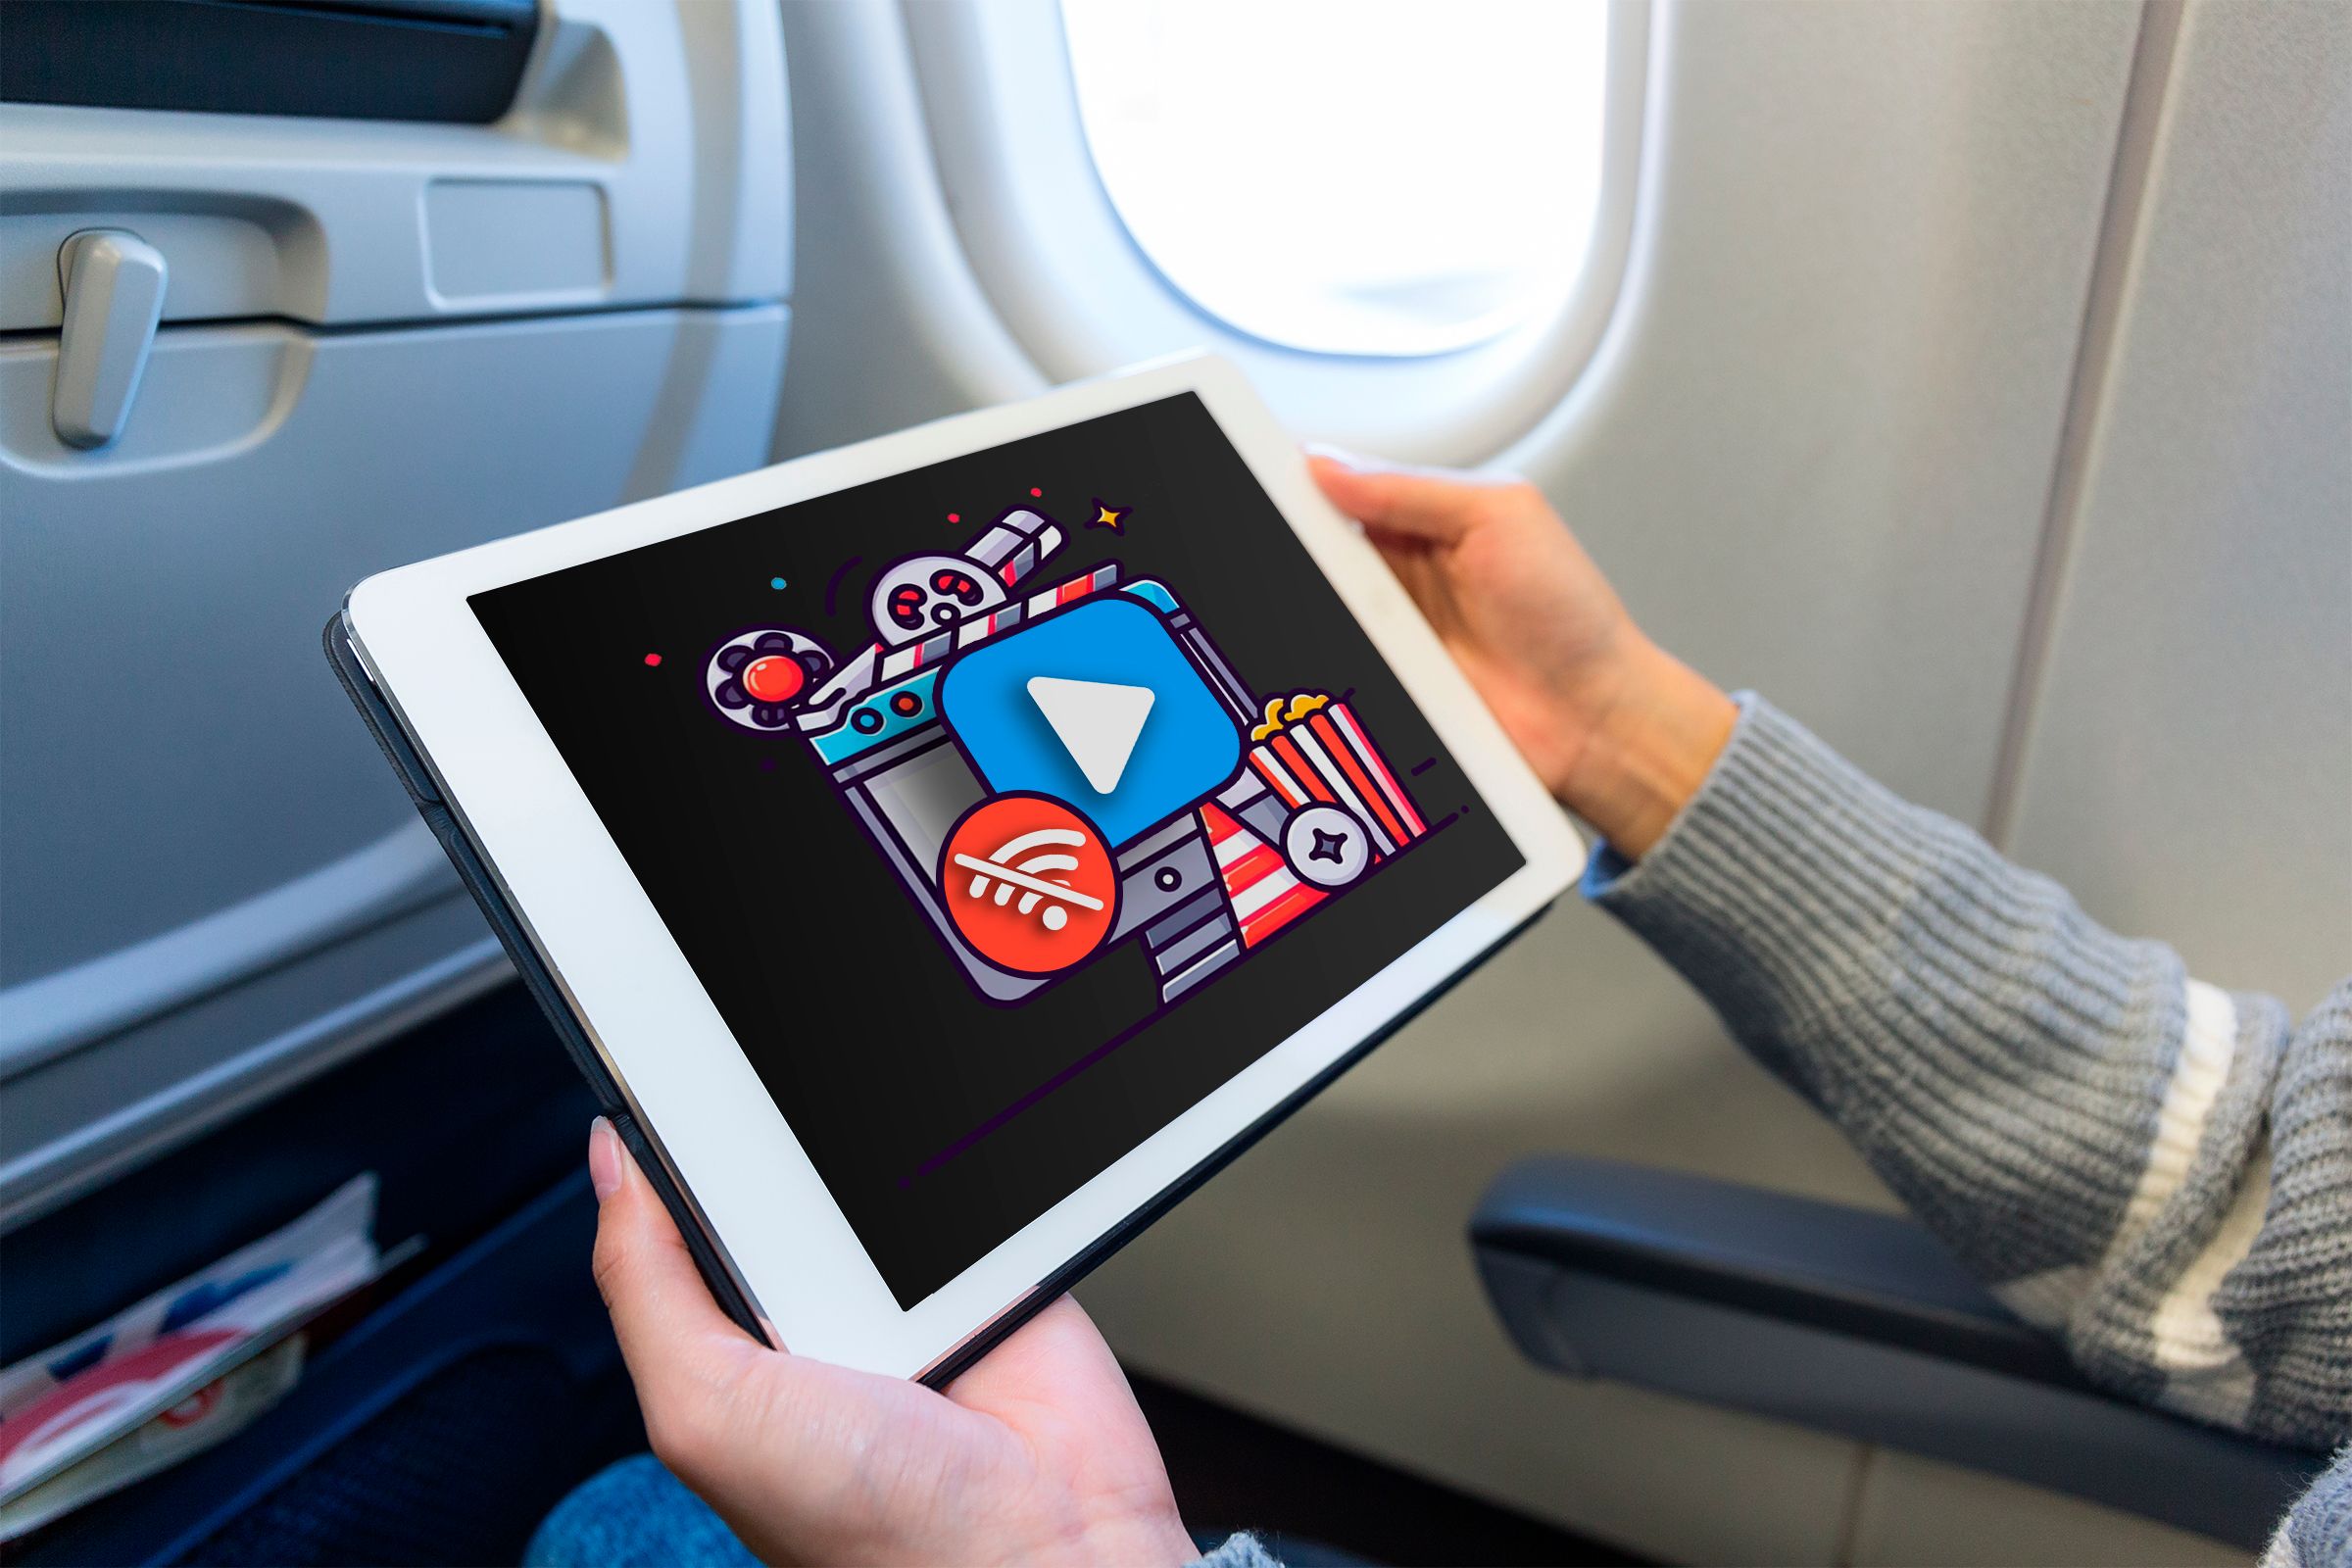 Woman using a tablet on an airplane with an illustration related to watching movies on the screen.